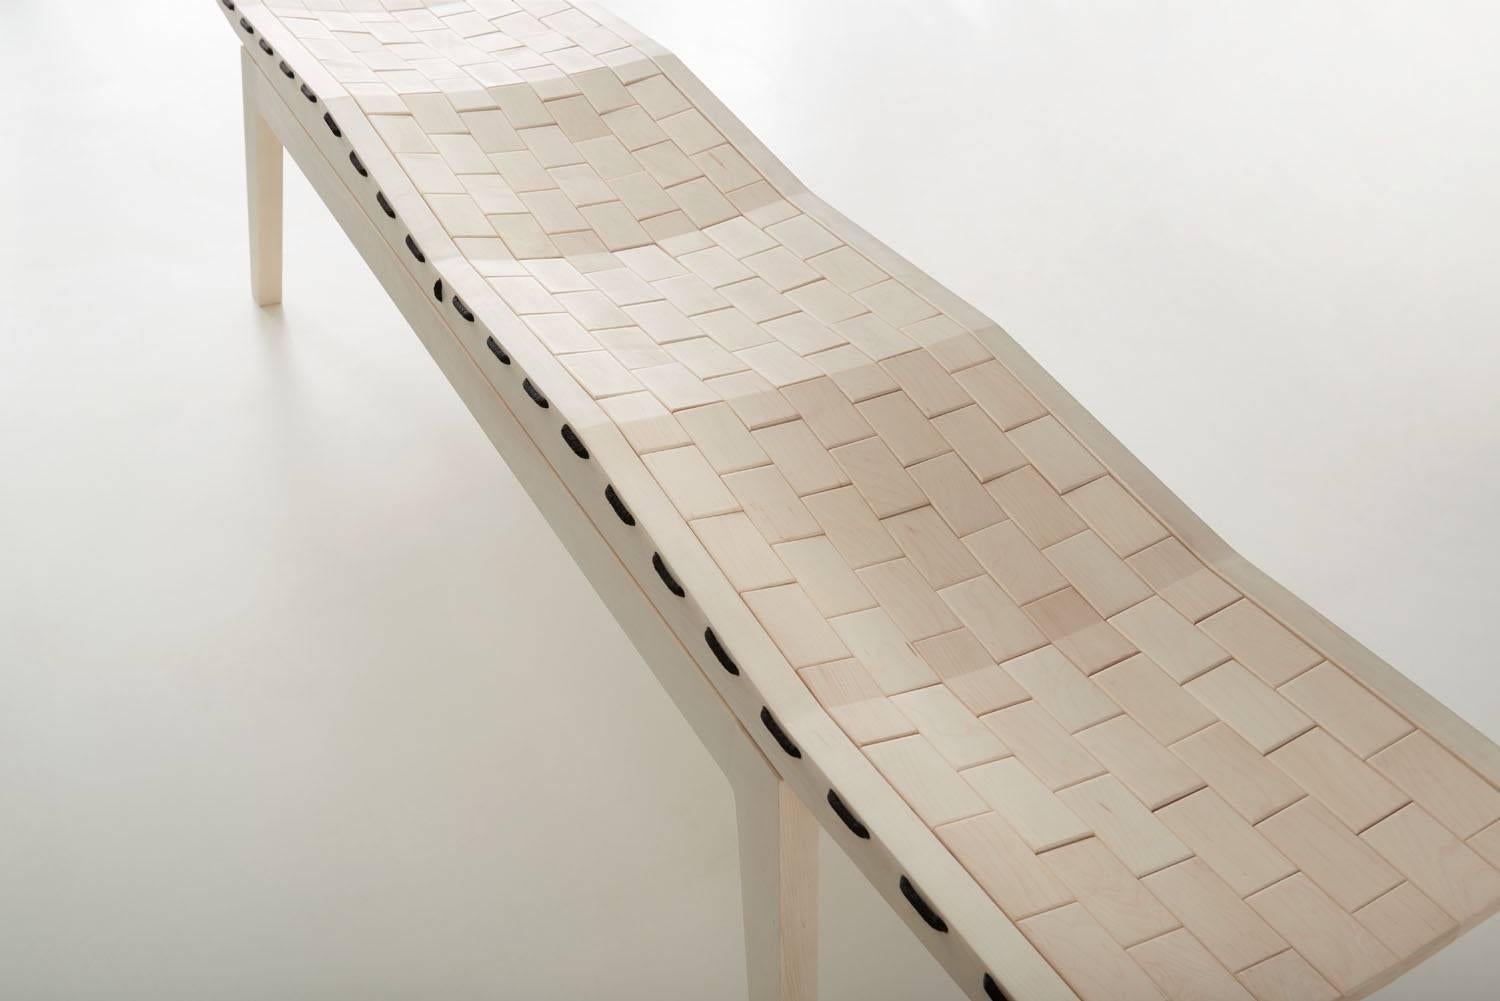 Woodsport RB bench. Named after the running bond pattern in which bricks are laid. Individual pieces of bleached maple are laced together with high grade polyester rope, creating a flexible surface that forms to the occupant. The bench is detailed